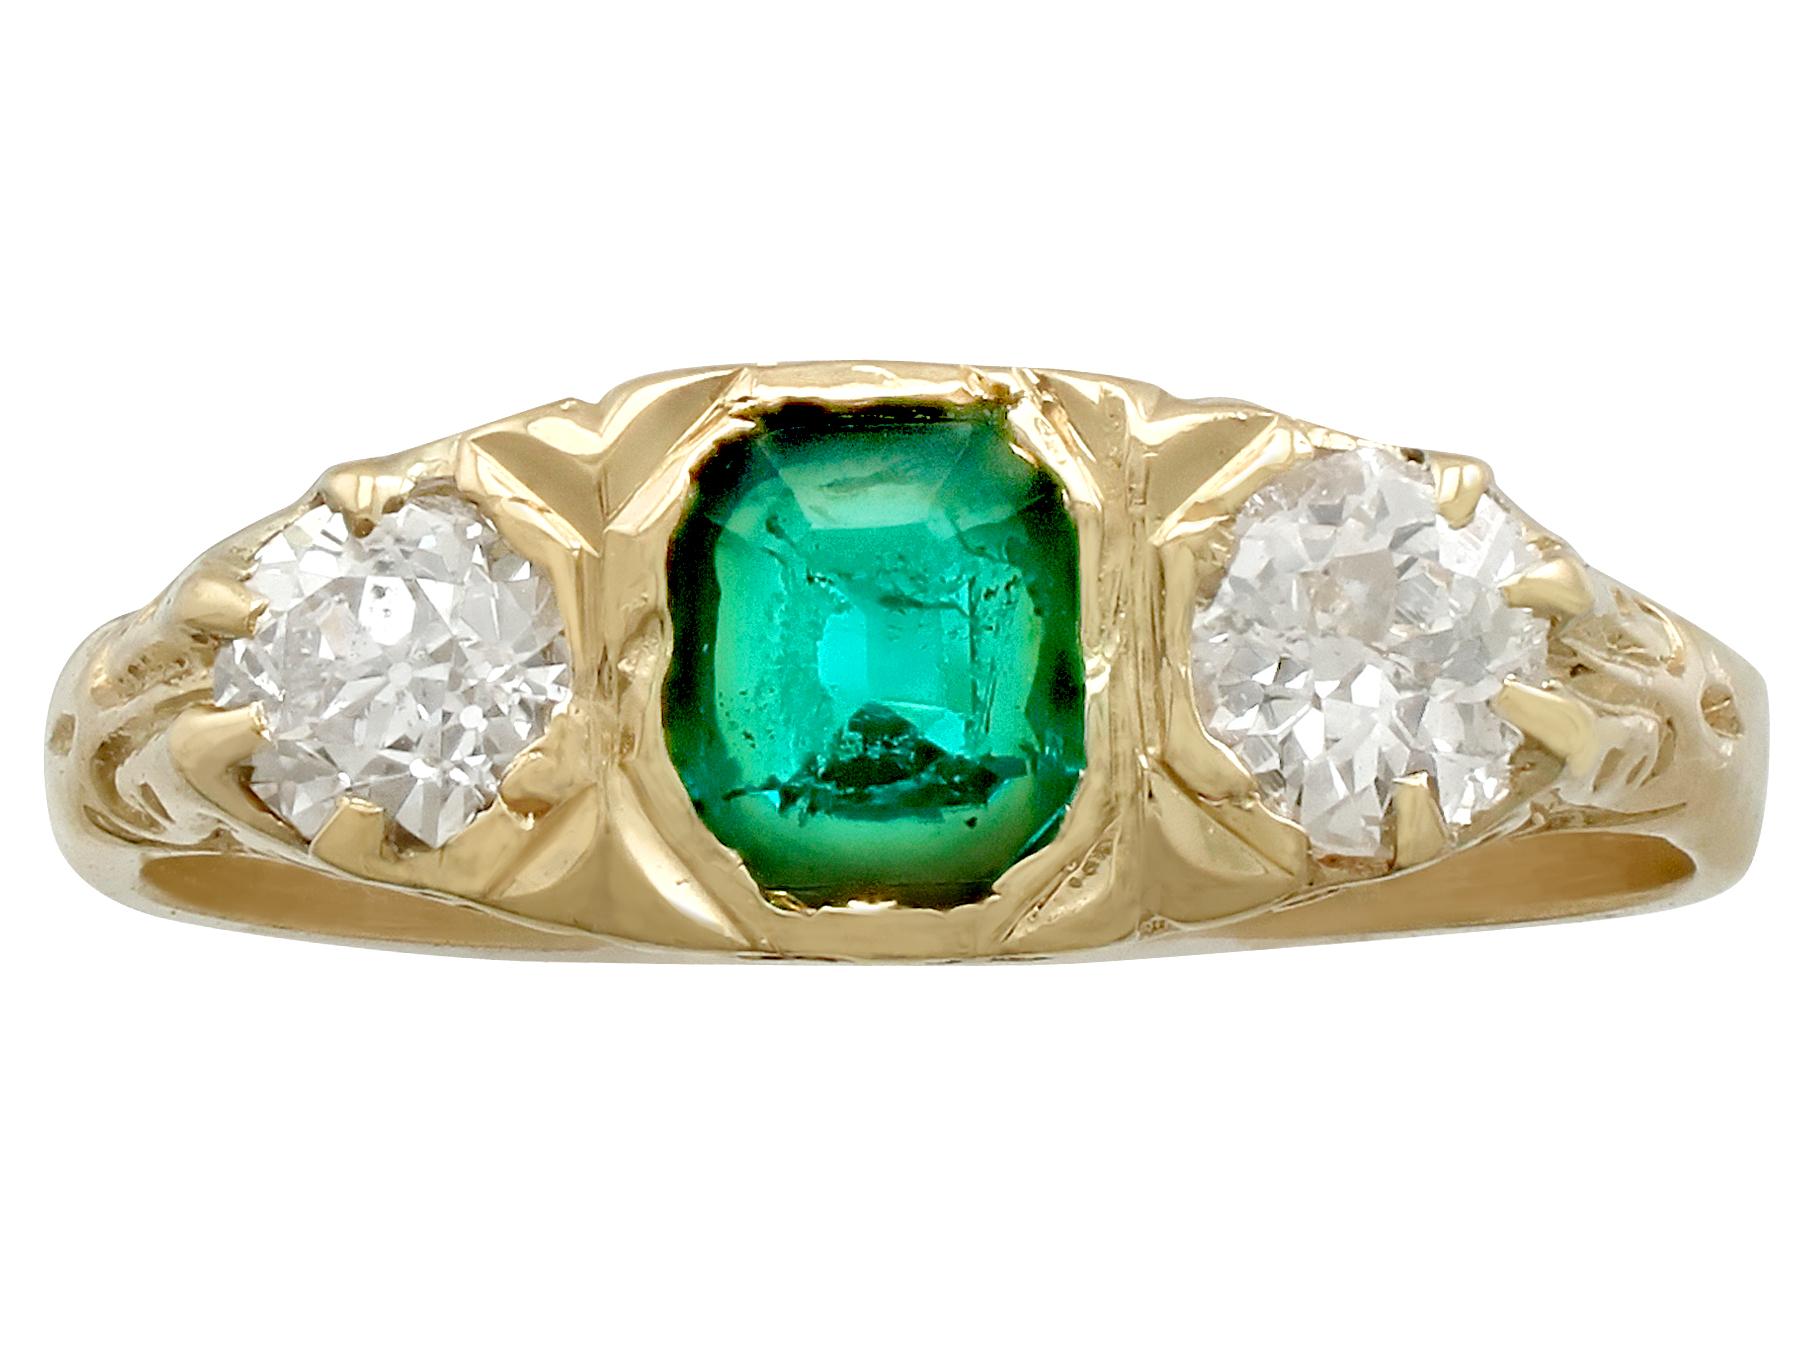 A fine and impressive antique 0.44 carat natural emerald and 0.42 carat diamond, 18 karat yellow gold, three stone ring; part of our antique jewelry and estate jewelry collections.

This impressive antique dress ring has been crafted in 18 karat